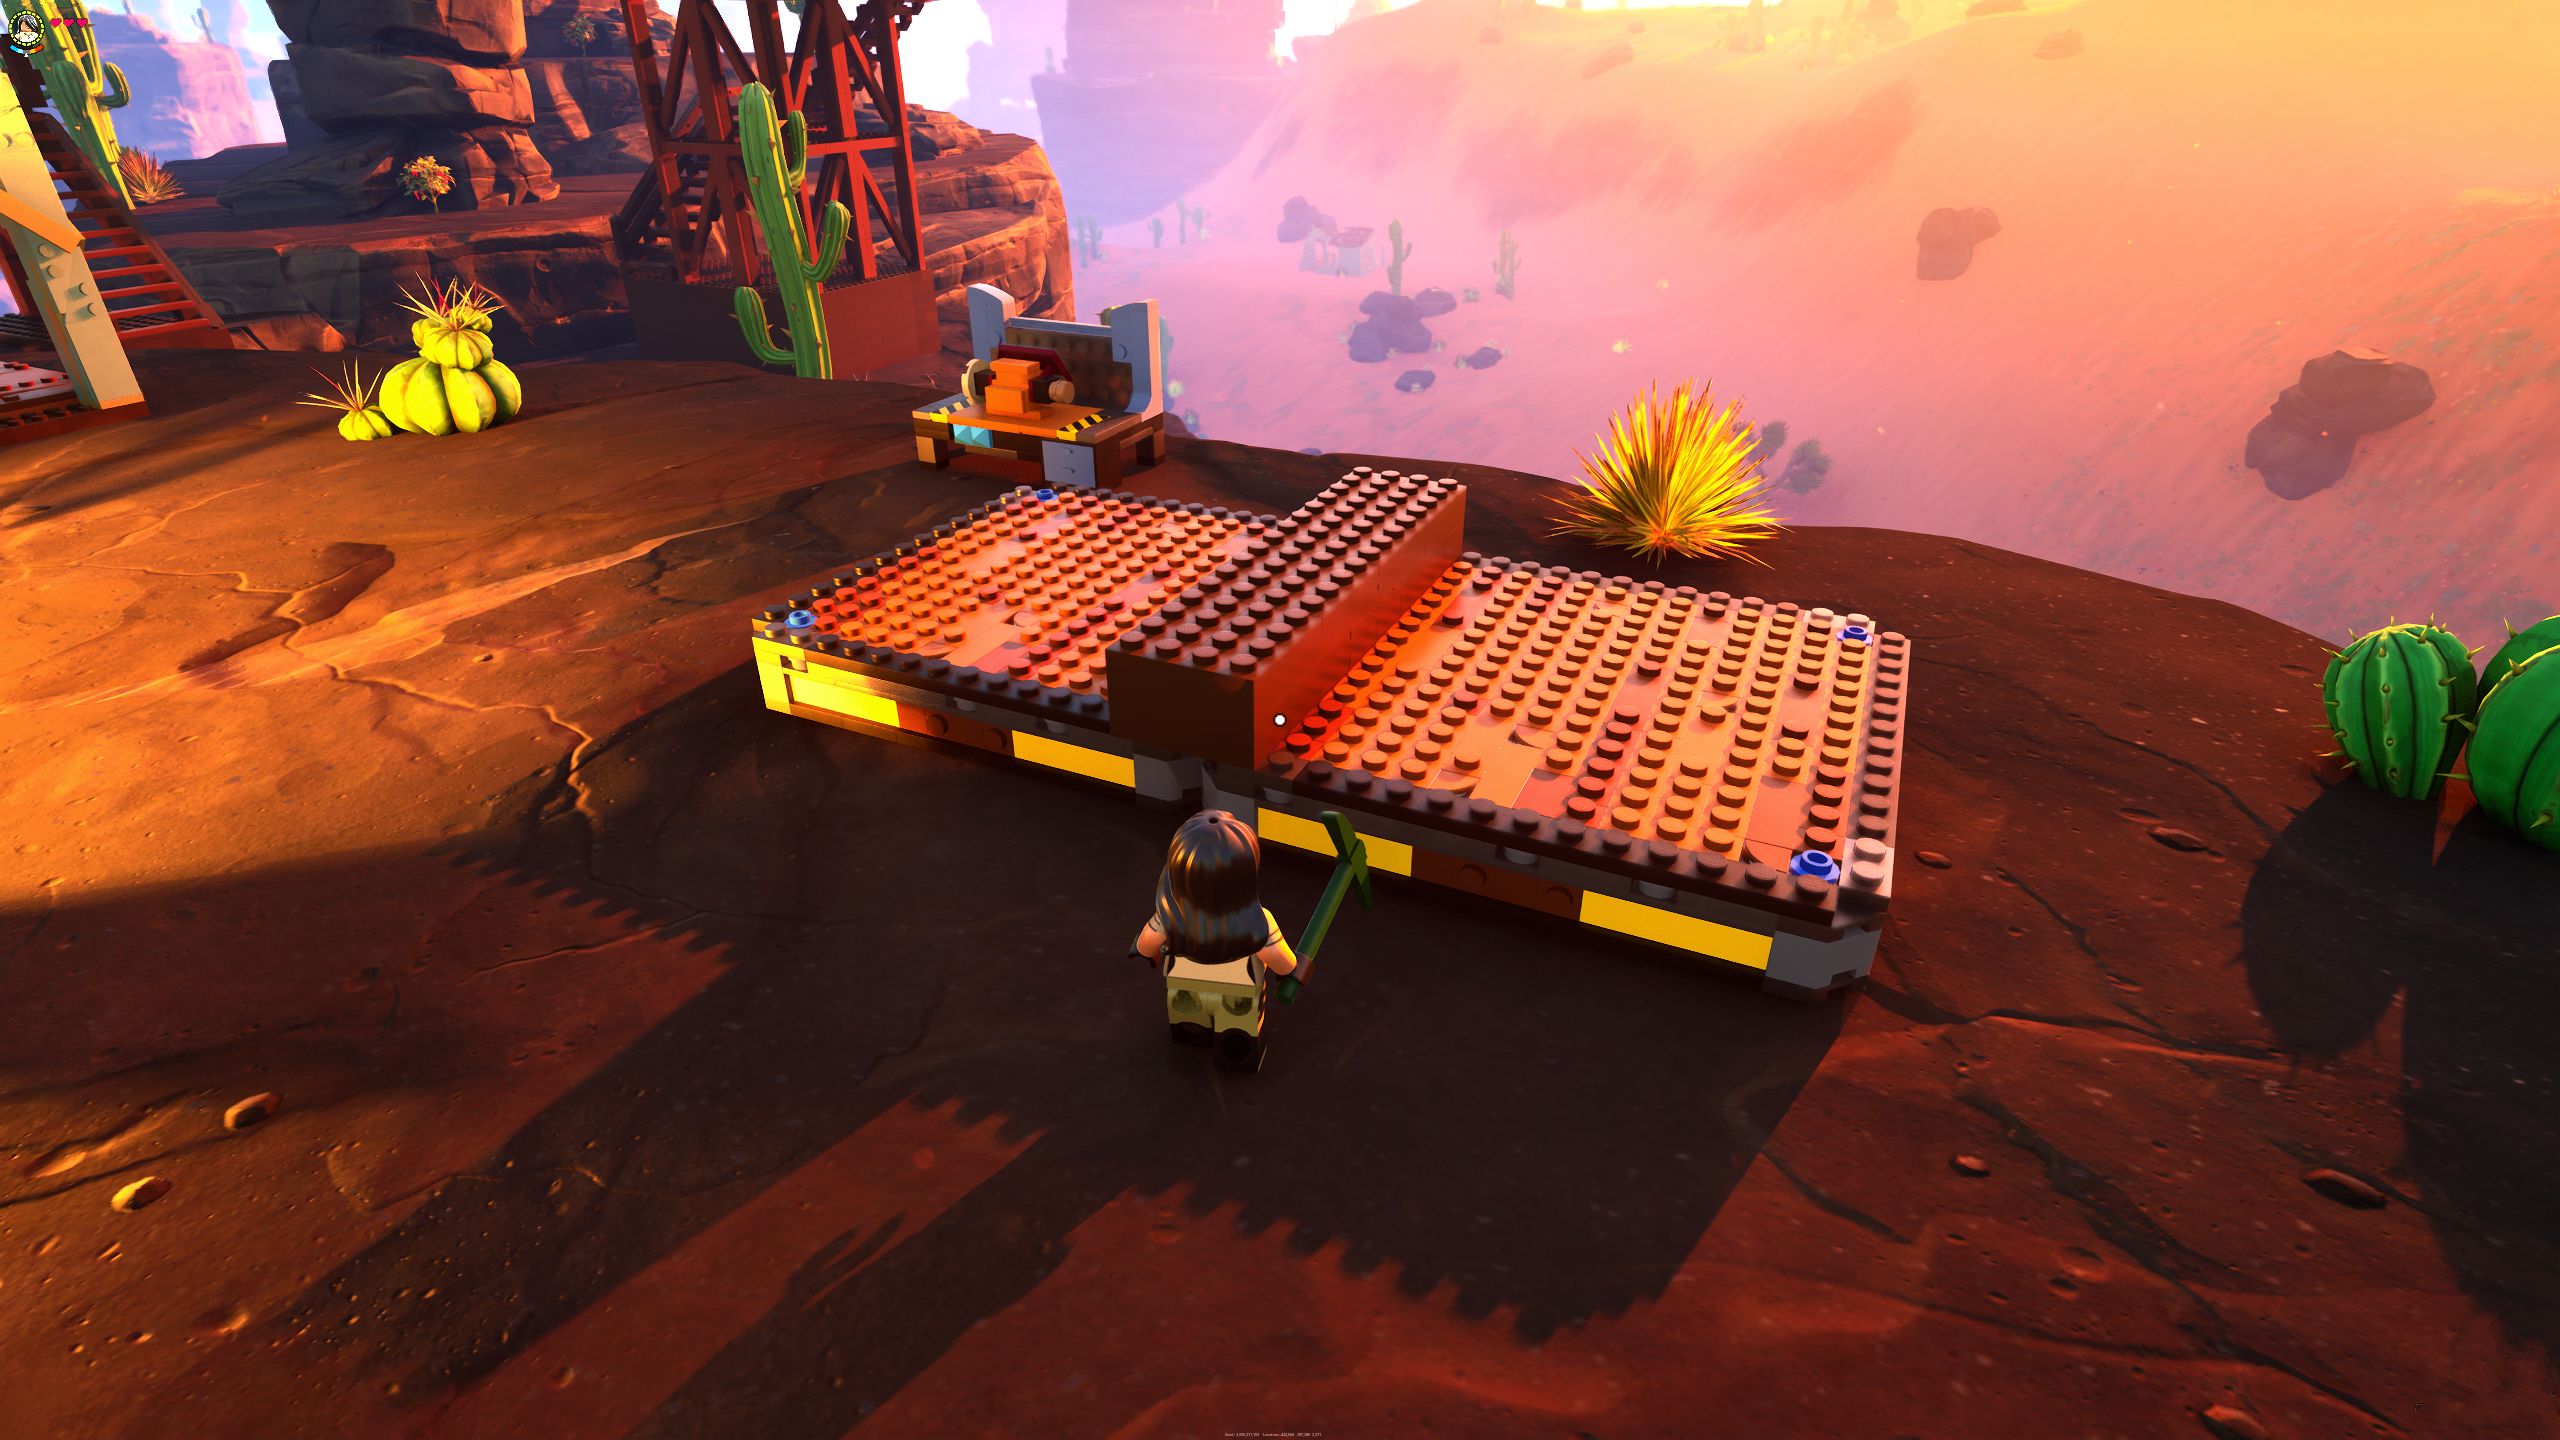 LEGO Fortnite Minifigure Combining Two Wooden Dynamic Platforms With Wooden Foundation Block While Standing In Desert At Sunset